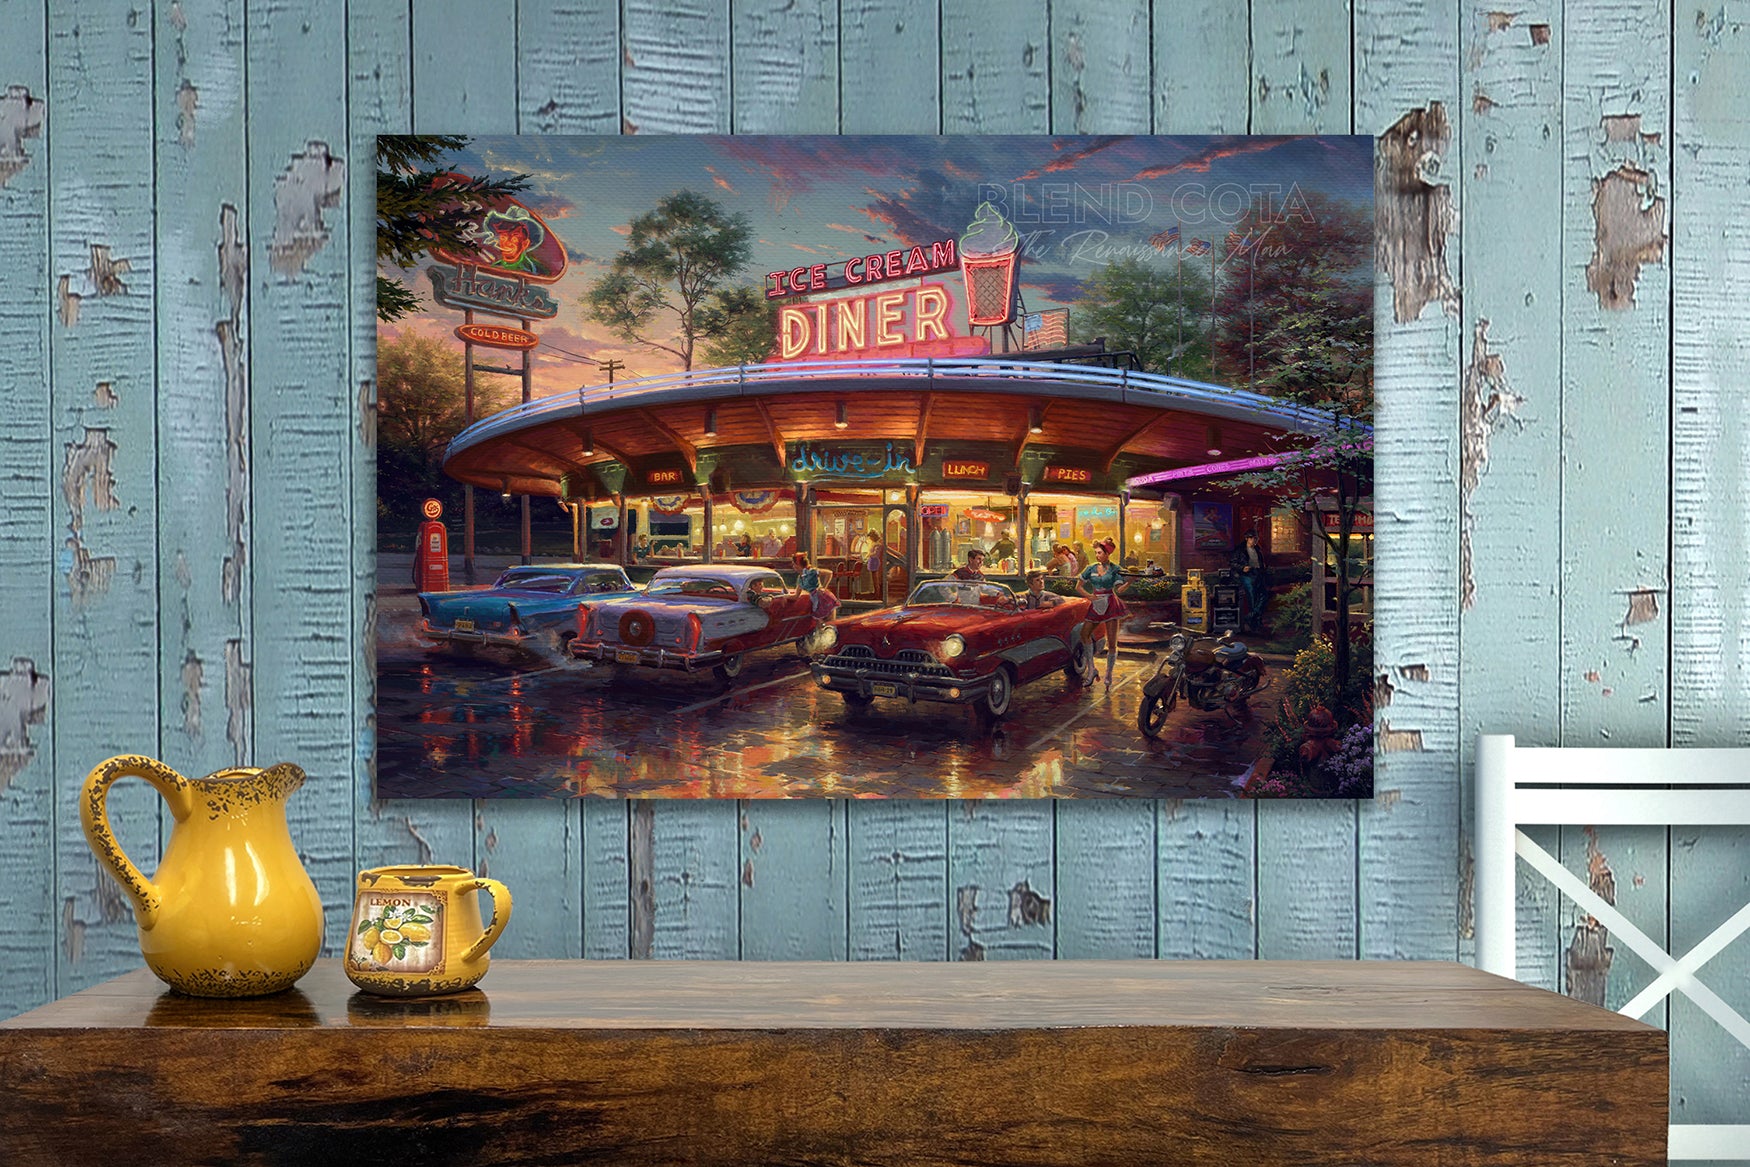 Meet You At The Diner a nostalgic looking 1950's scene waitress on rollerblades and a sunset  Limited Edition Art on Canvas from Blend Cota Studios displayed on a wall